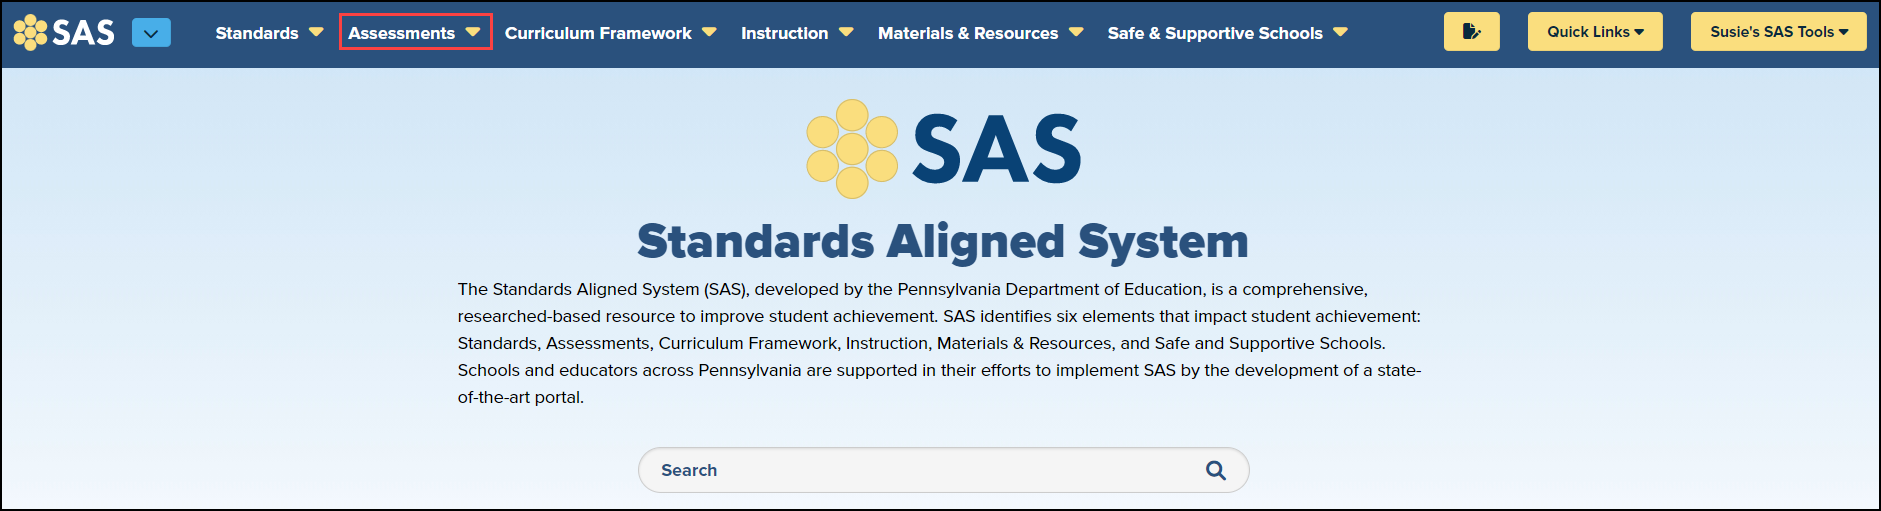 SAS homepage with assesments buton highlighted